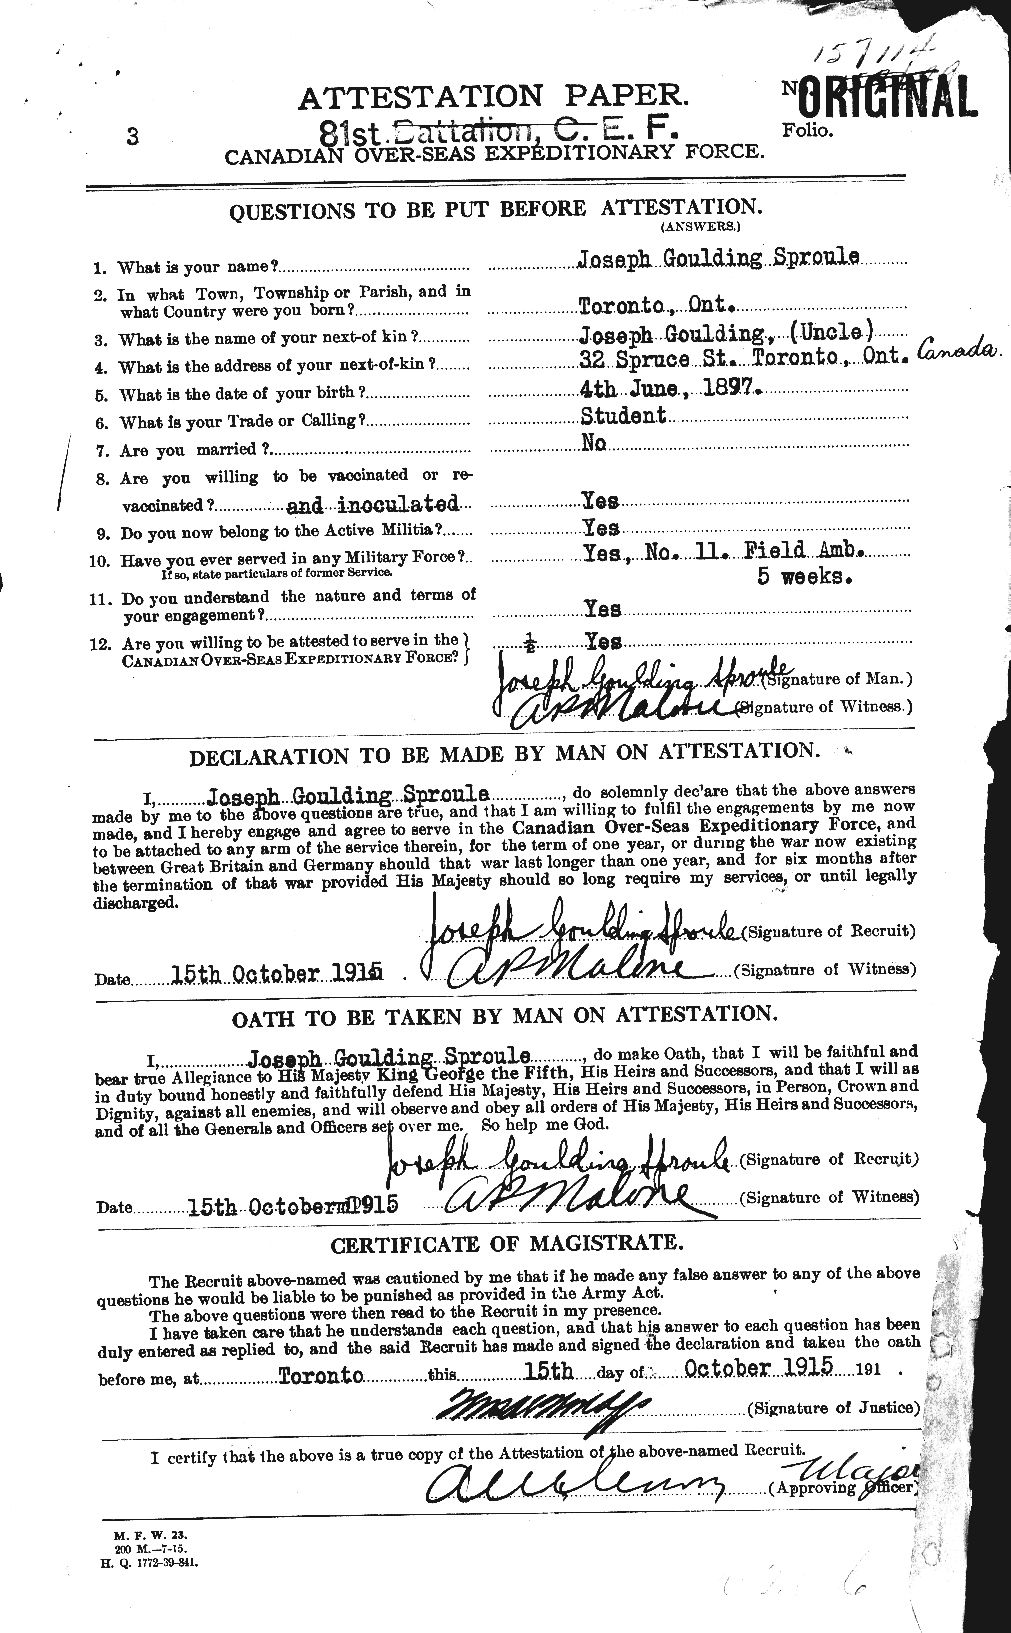 Personnel Records of the First World War - CEF 111920a